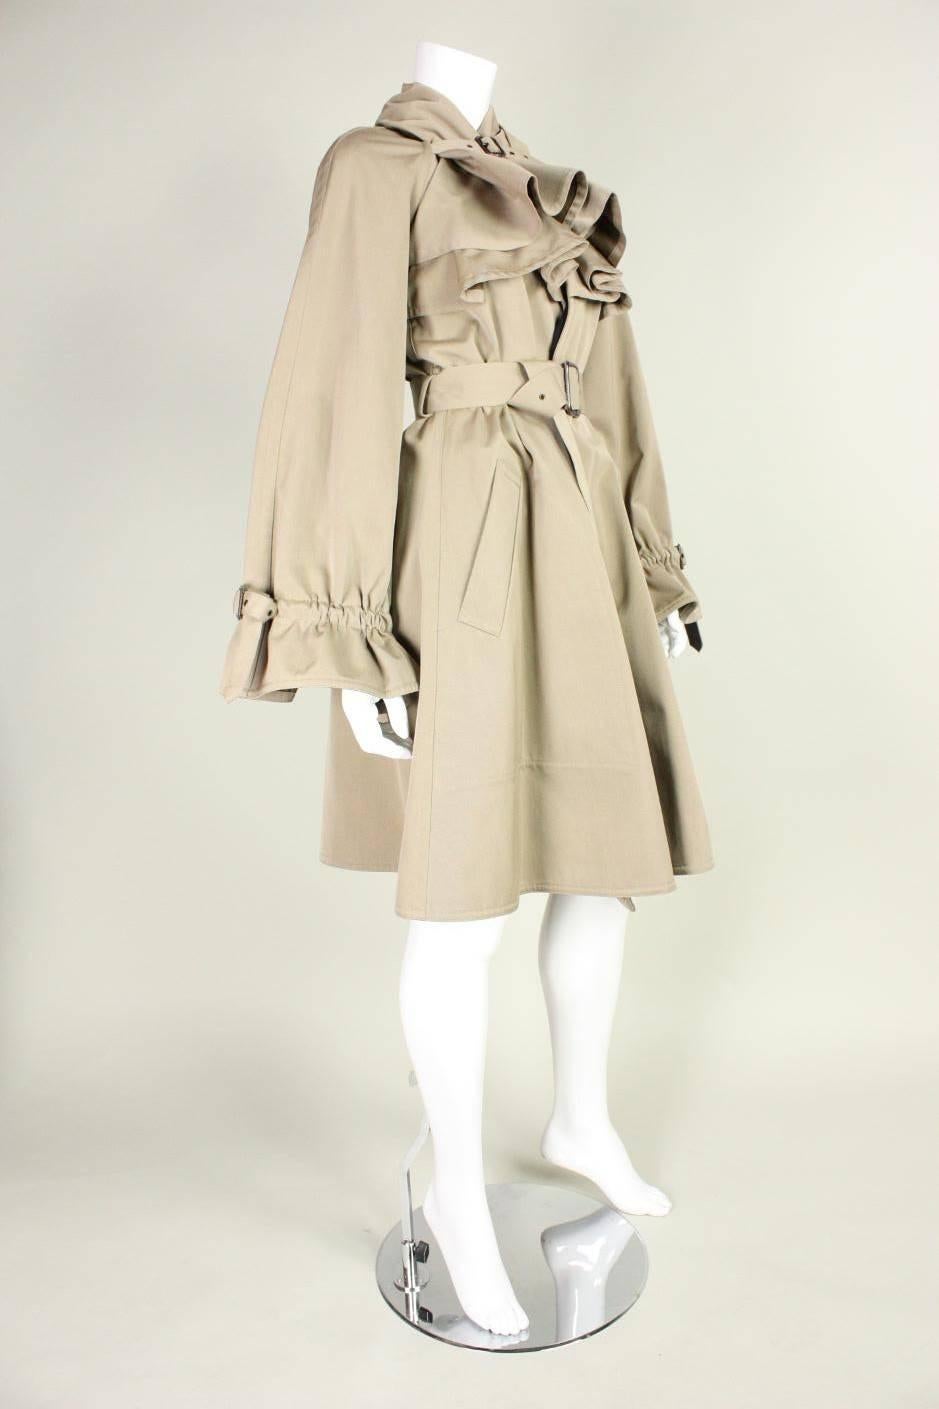 Trench rain coat from Jean-Paul Gaultier is made of tan fabric with a waterproof backing.  Neckline can be worn two ways (as shown).  Wide sleeves are gathered at wrists.  Hip pockets.  Detached belt.  Unlined except for throughout bust, where it is